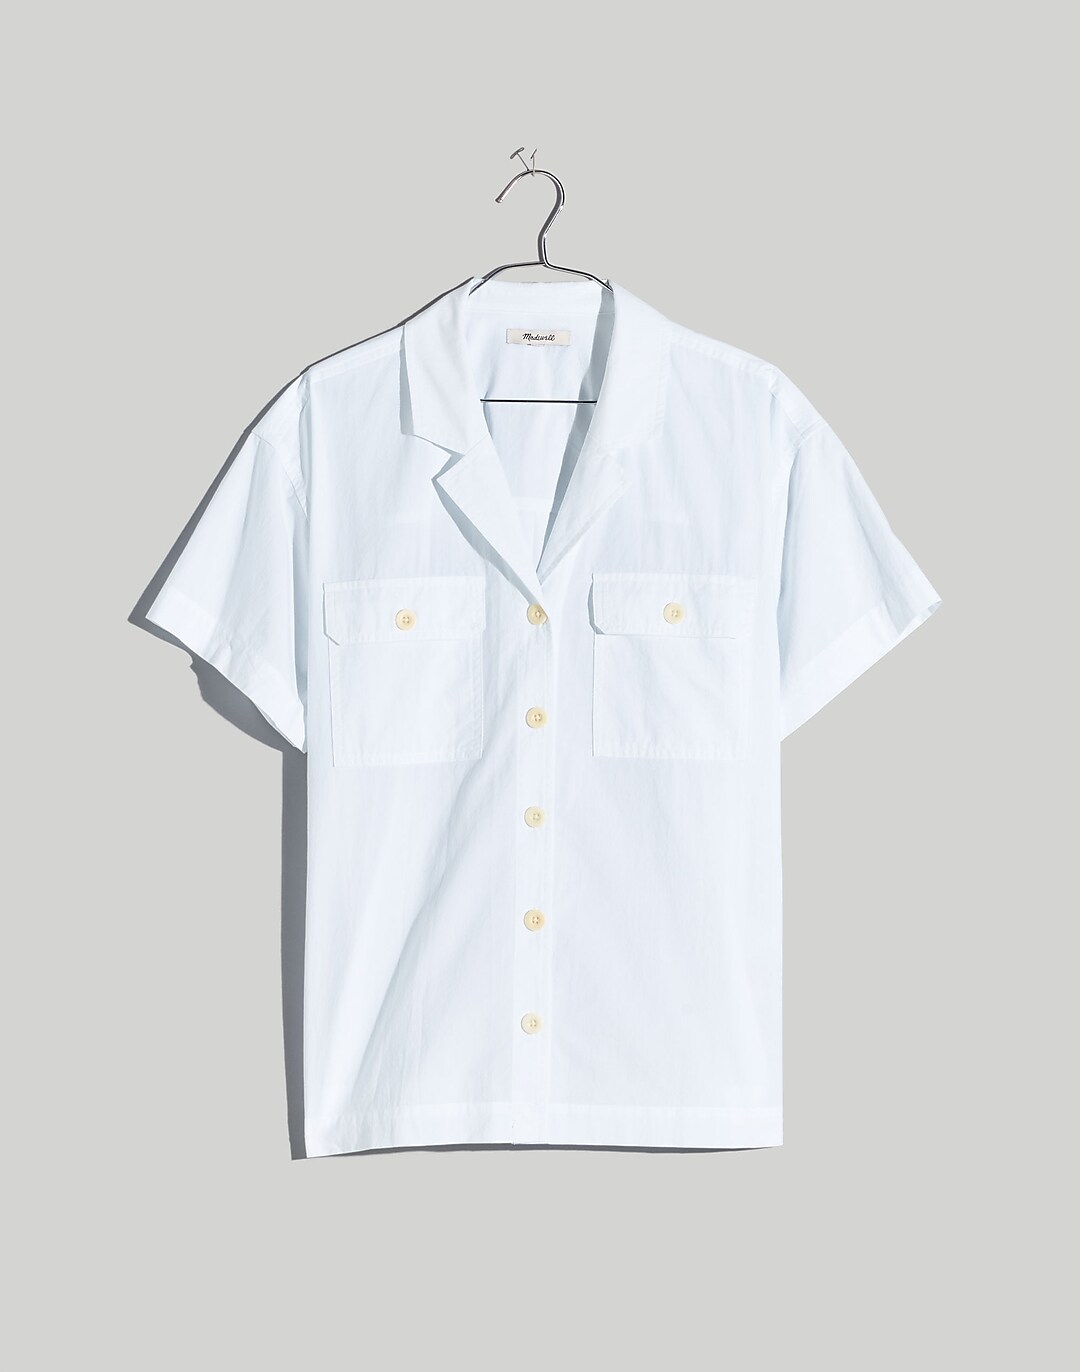 10 camp collar shirts for summer: Madewell, UNIQLO, and more